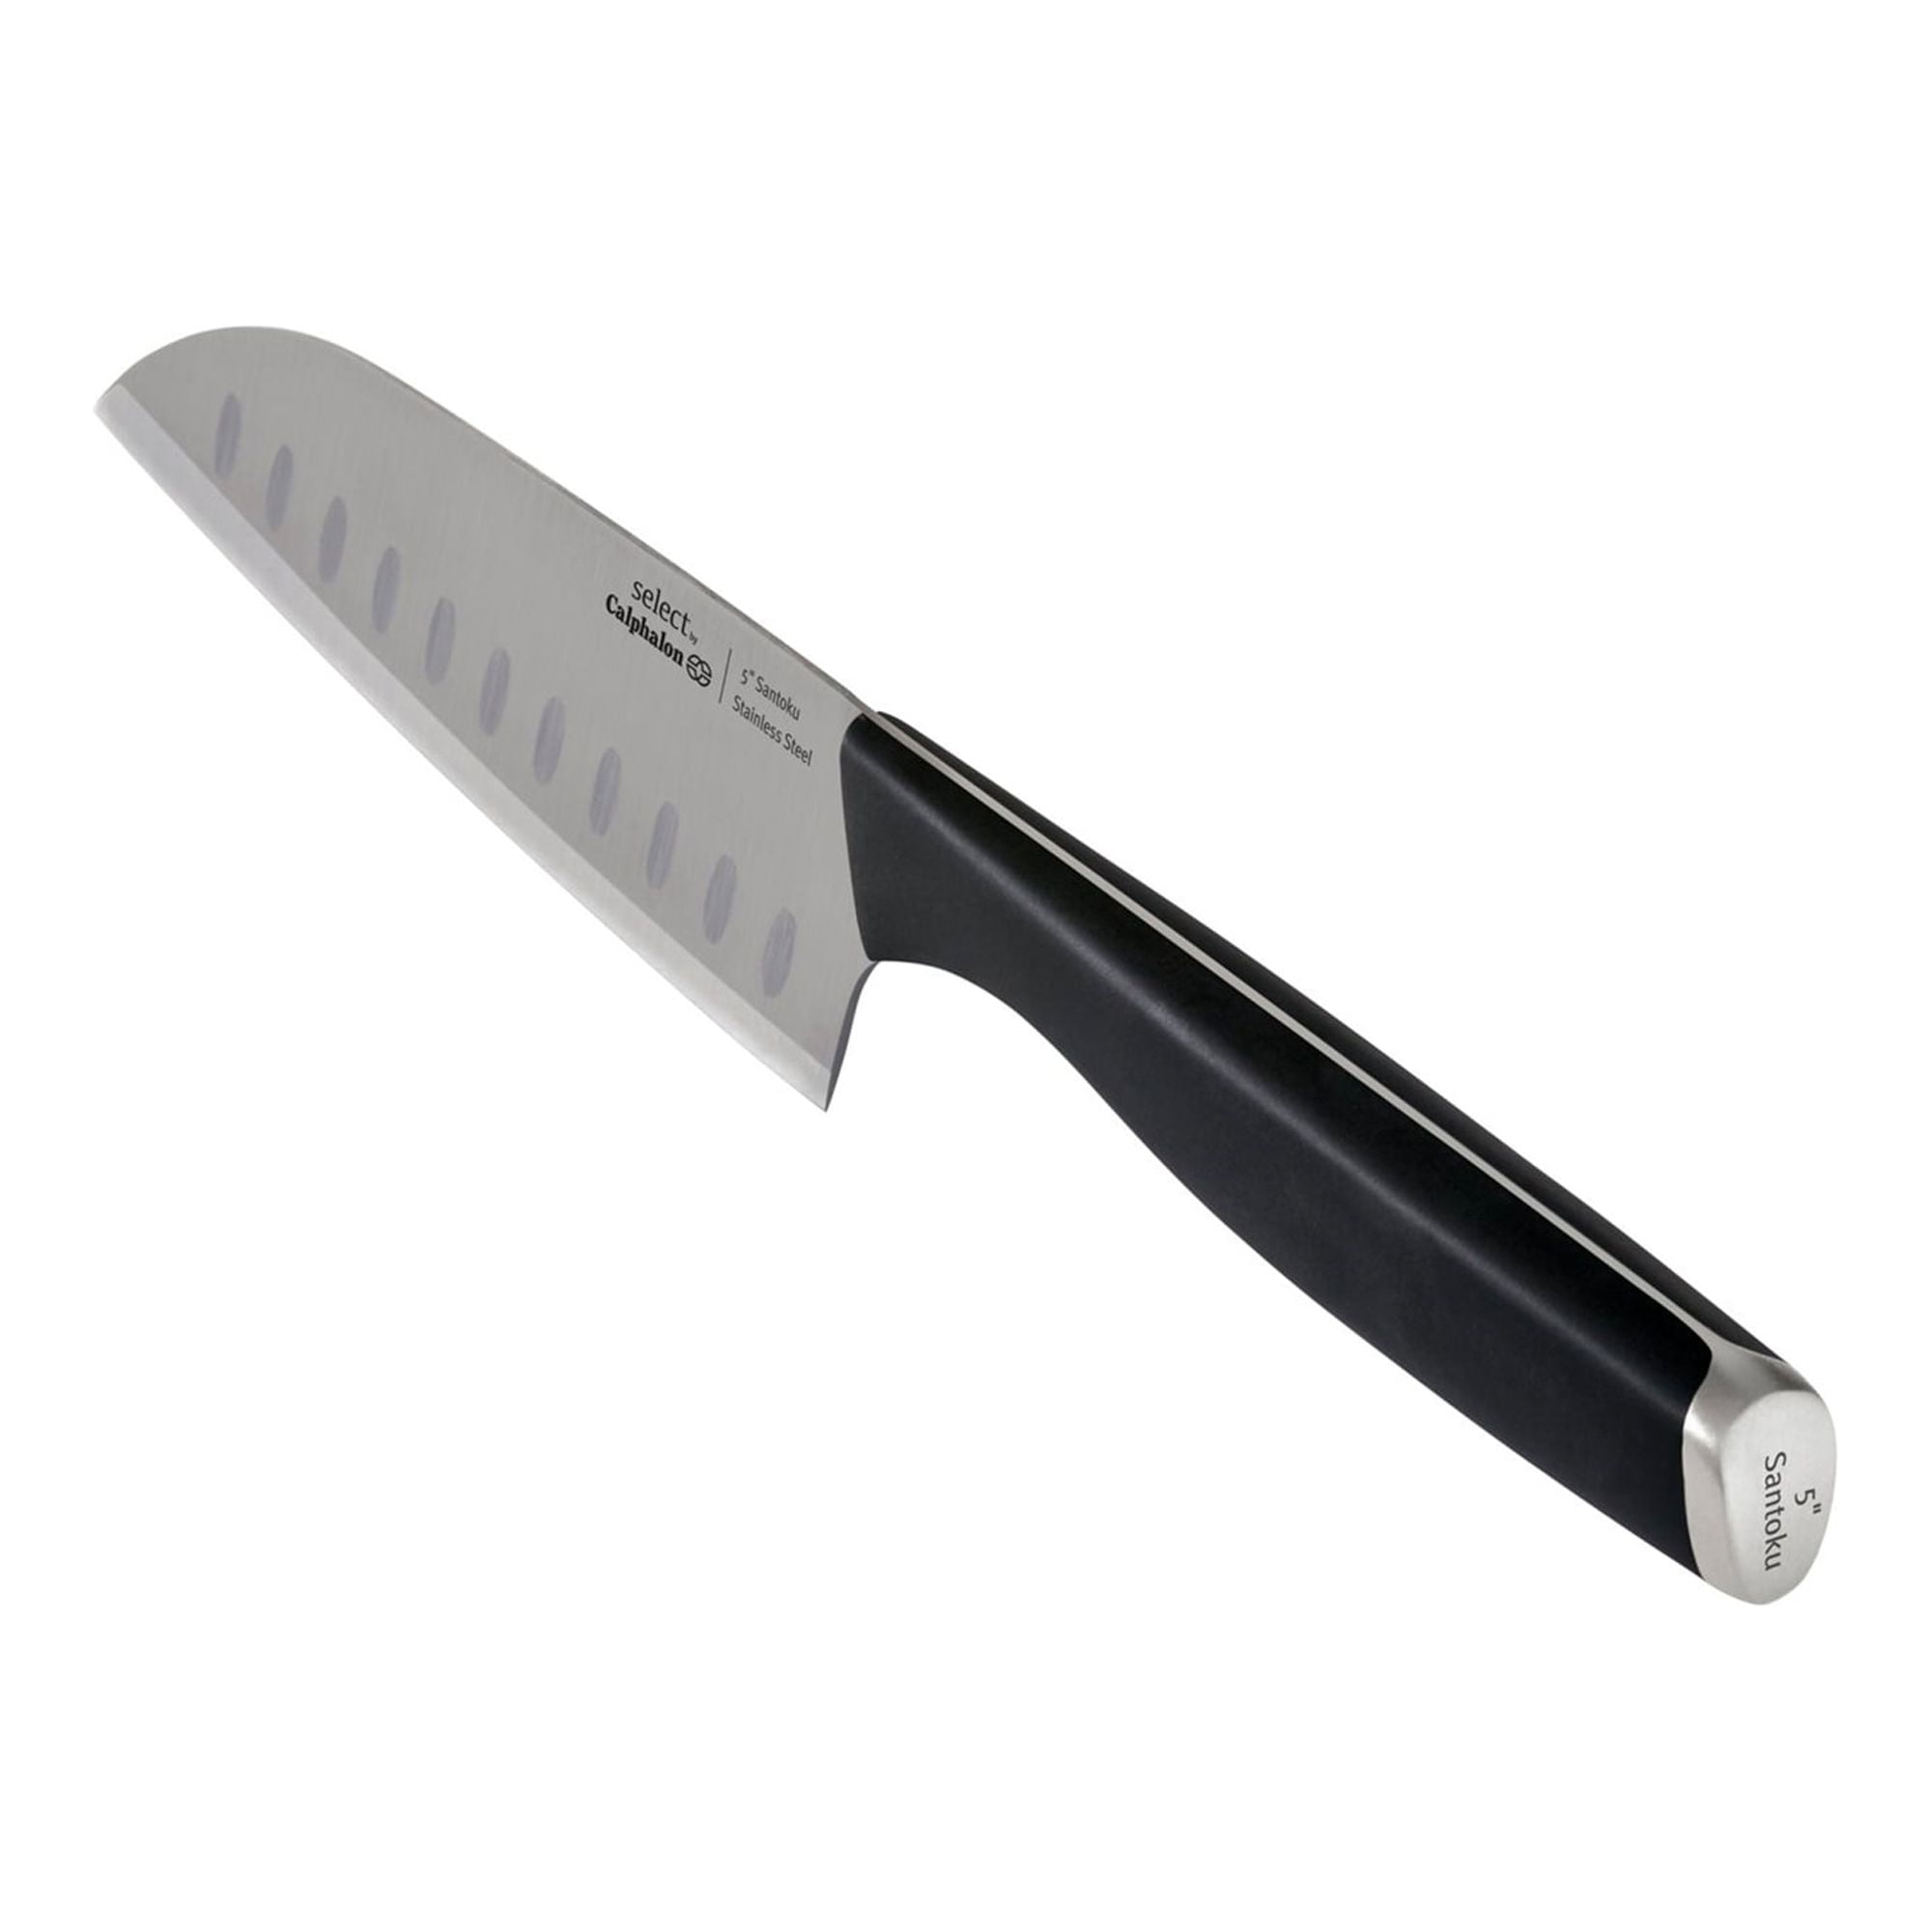 Are Calphalon Kitchen Knives Any Good? (In-Depth Review) - Prudent Reviews